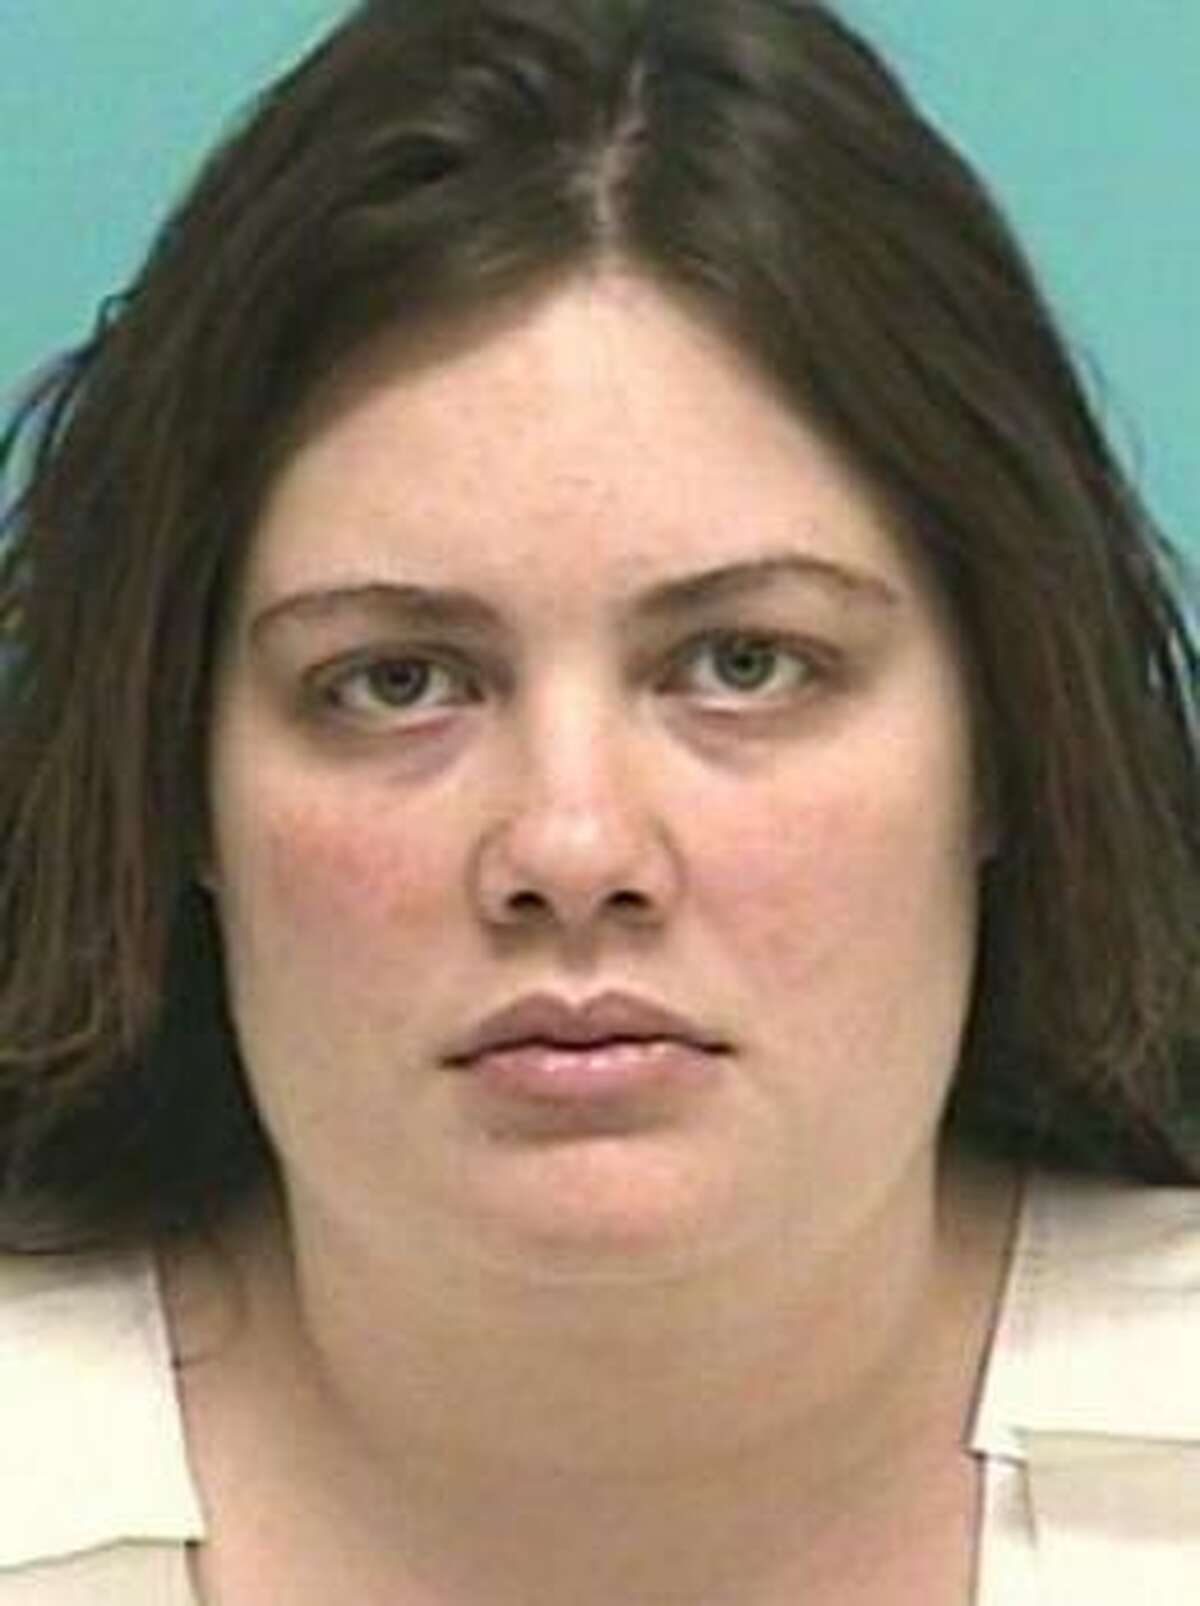 Denette Elizabeth Williams, 23, of Conroe, after being charged with injury to a child in March 2011.